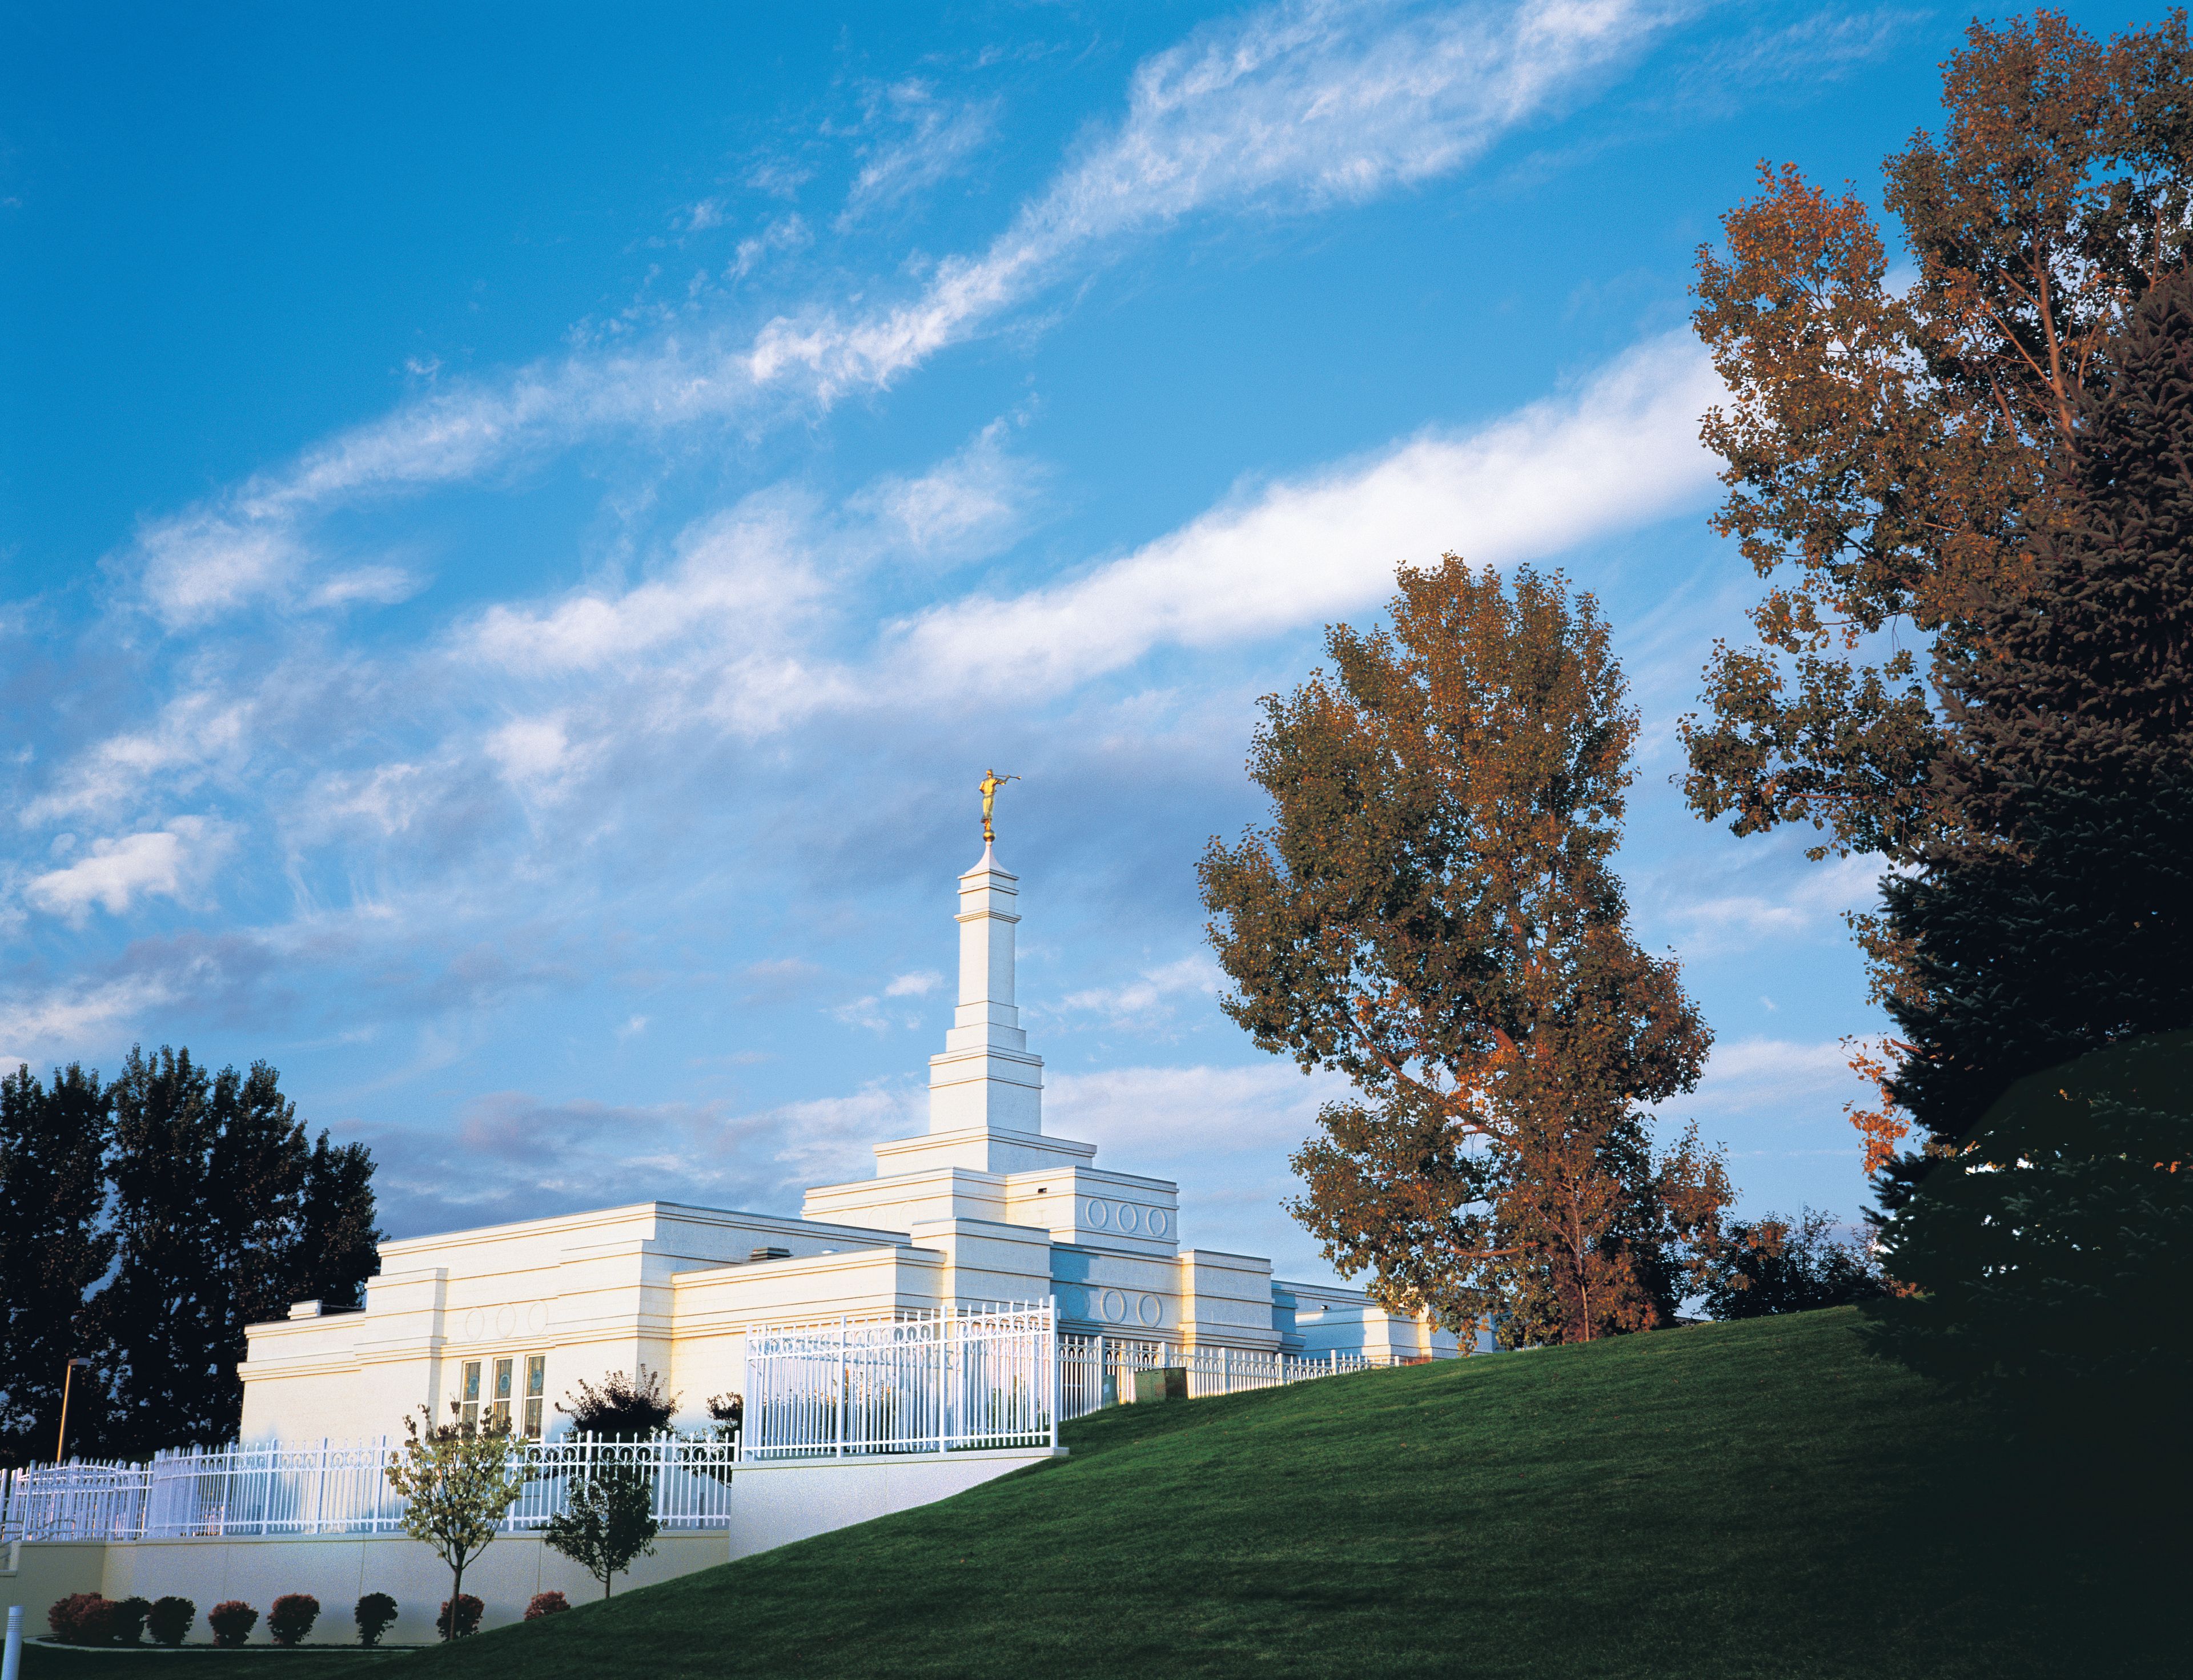 A view from the grounds of the Bismarck North Dakota Temple.